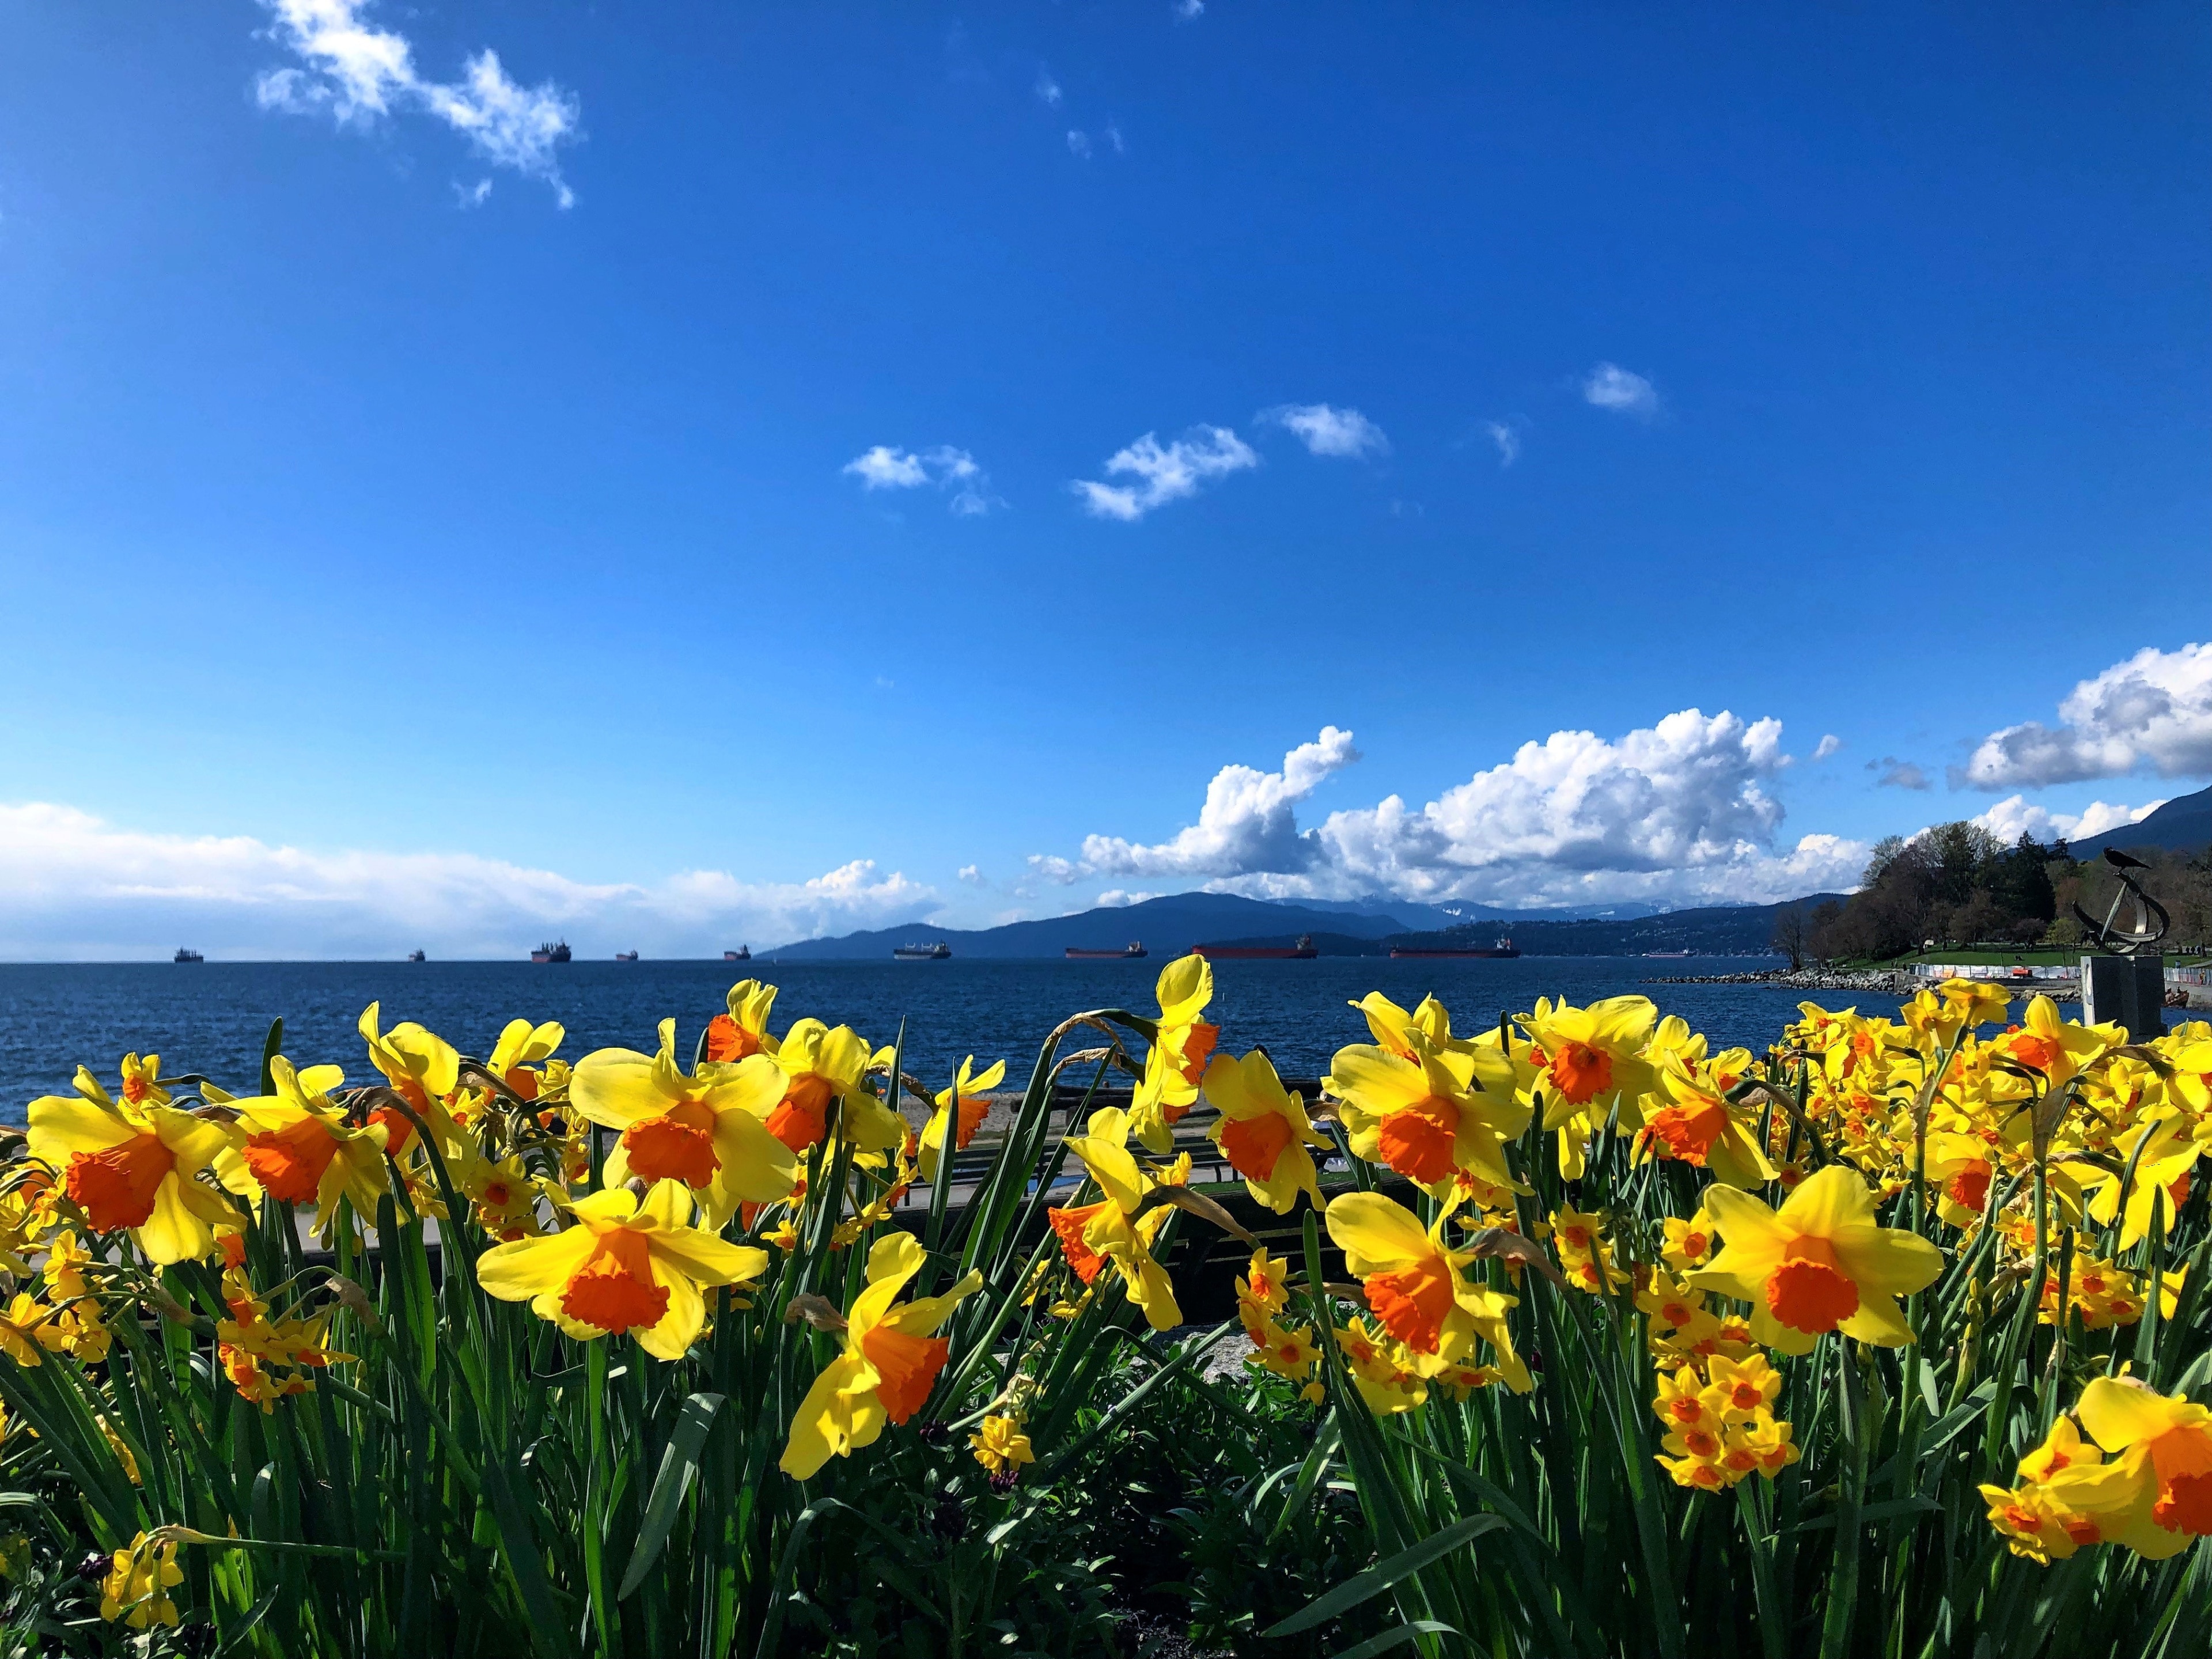 These sunny daffodils were the culmination of a stunning walk through Stanley park in the spring of last year :) #LifeAtExpediaGroup